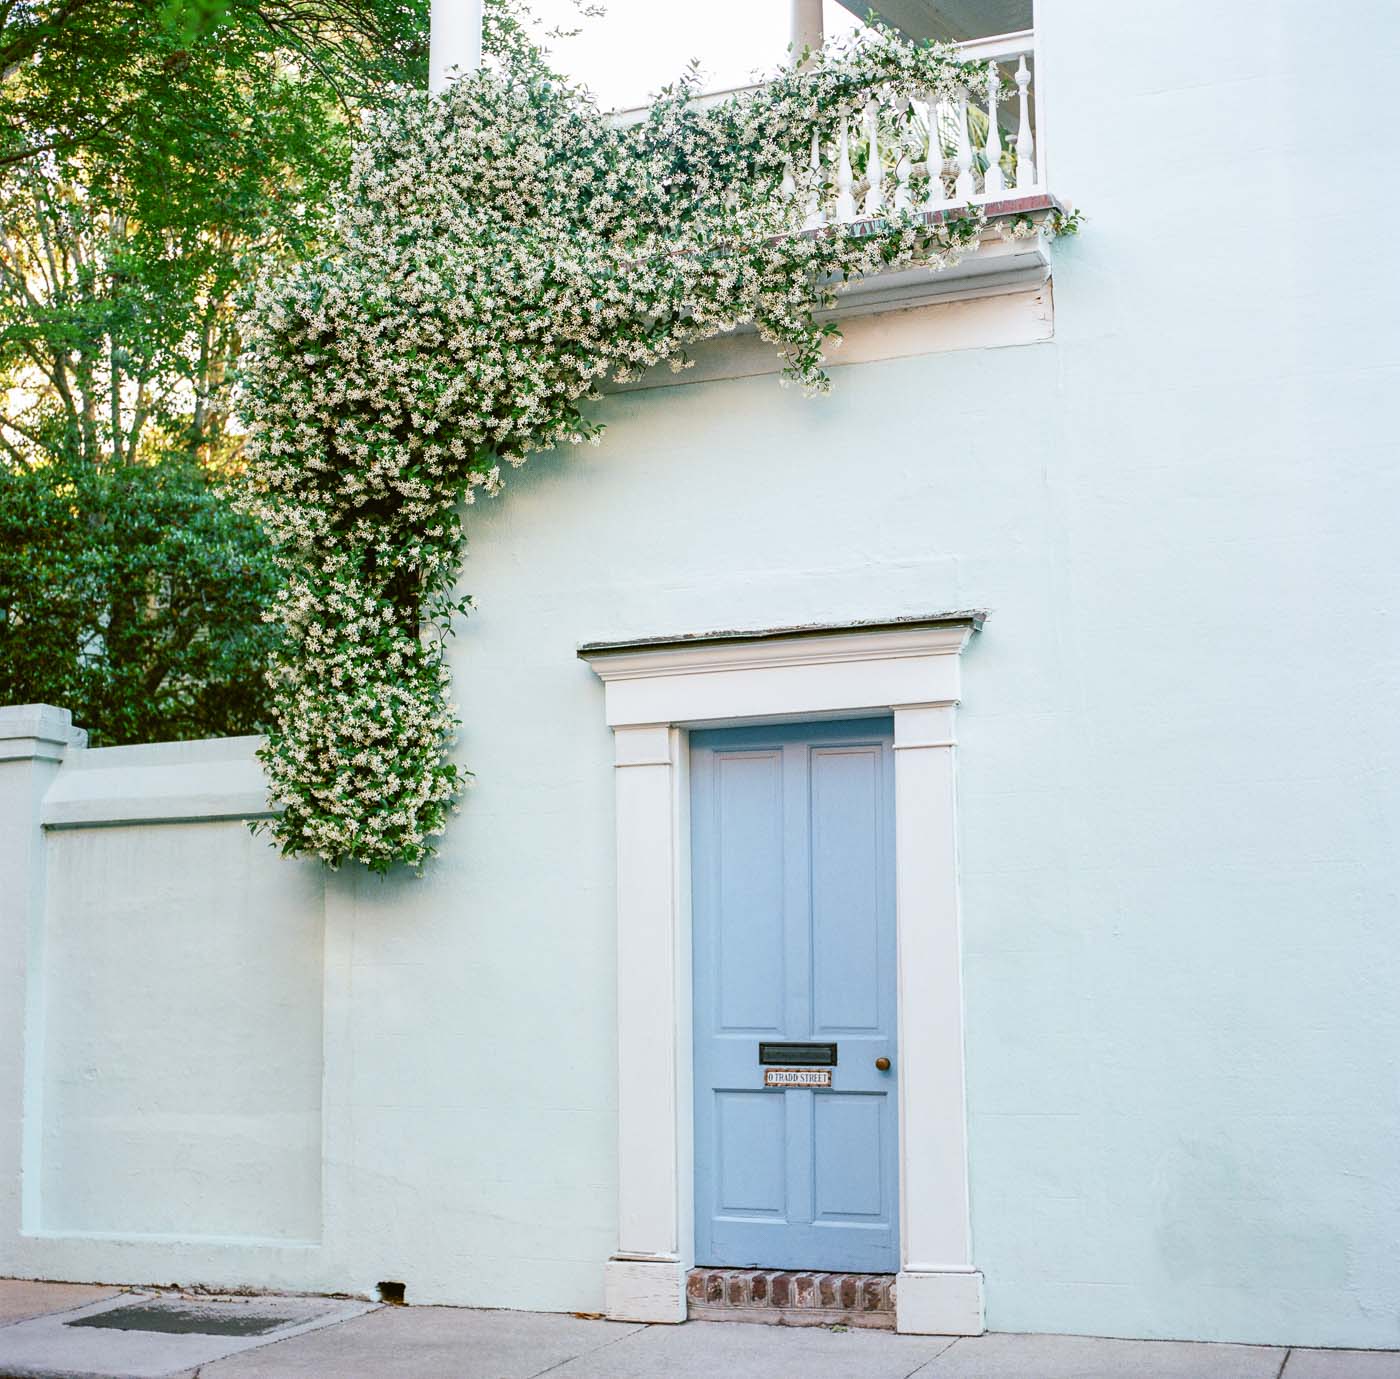 Film photograph of a historic Charleston South Carolina home with jasmine growing around its door on Tradd Street 